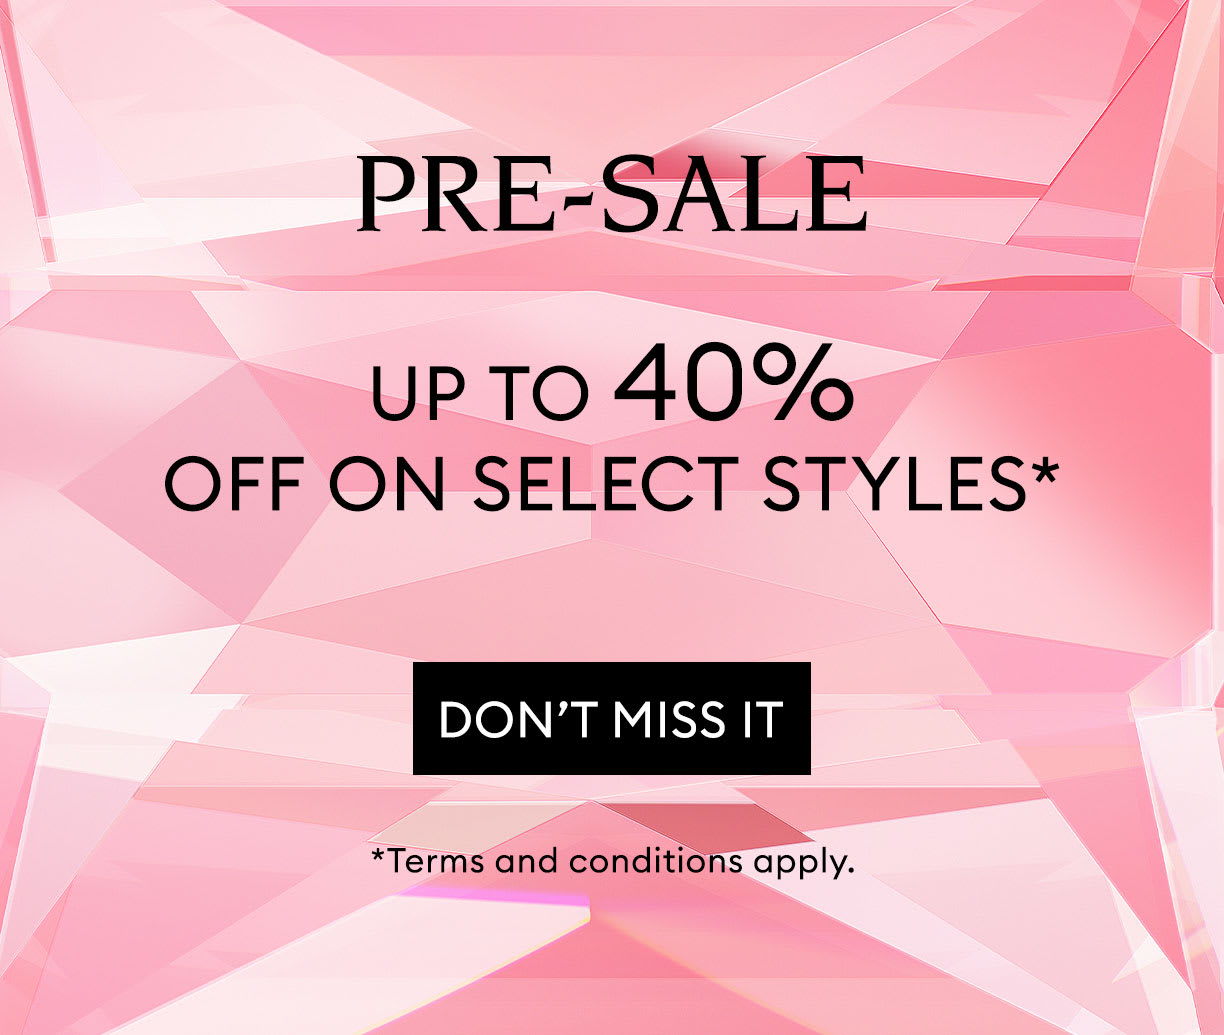 Pre-sale up to 40% off select styles* ending soon